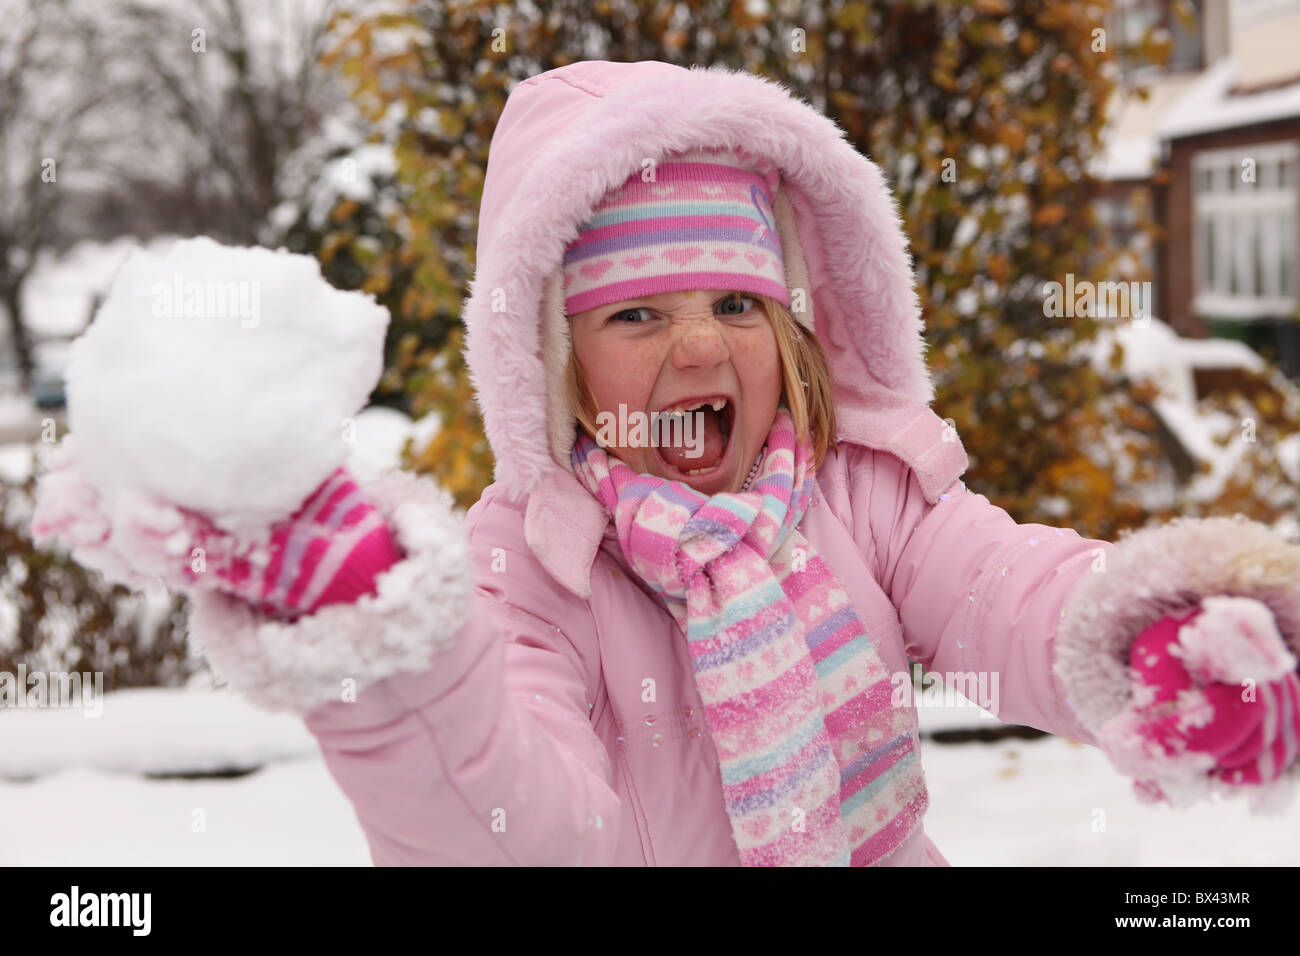 A young cheeky girl ready to throw a snowball Stock Photo